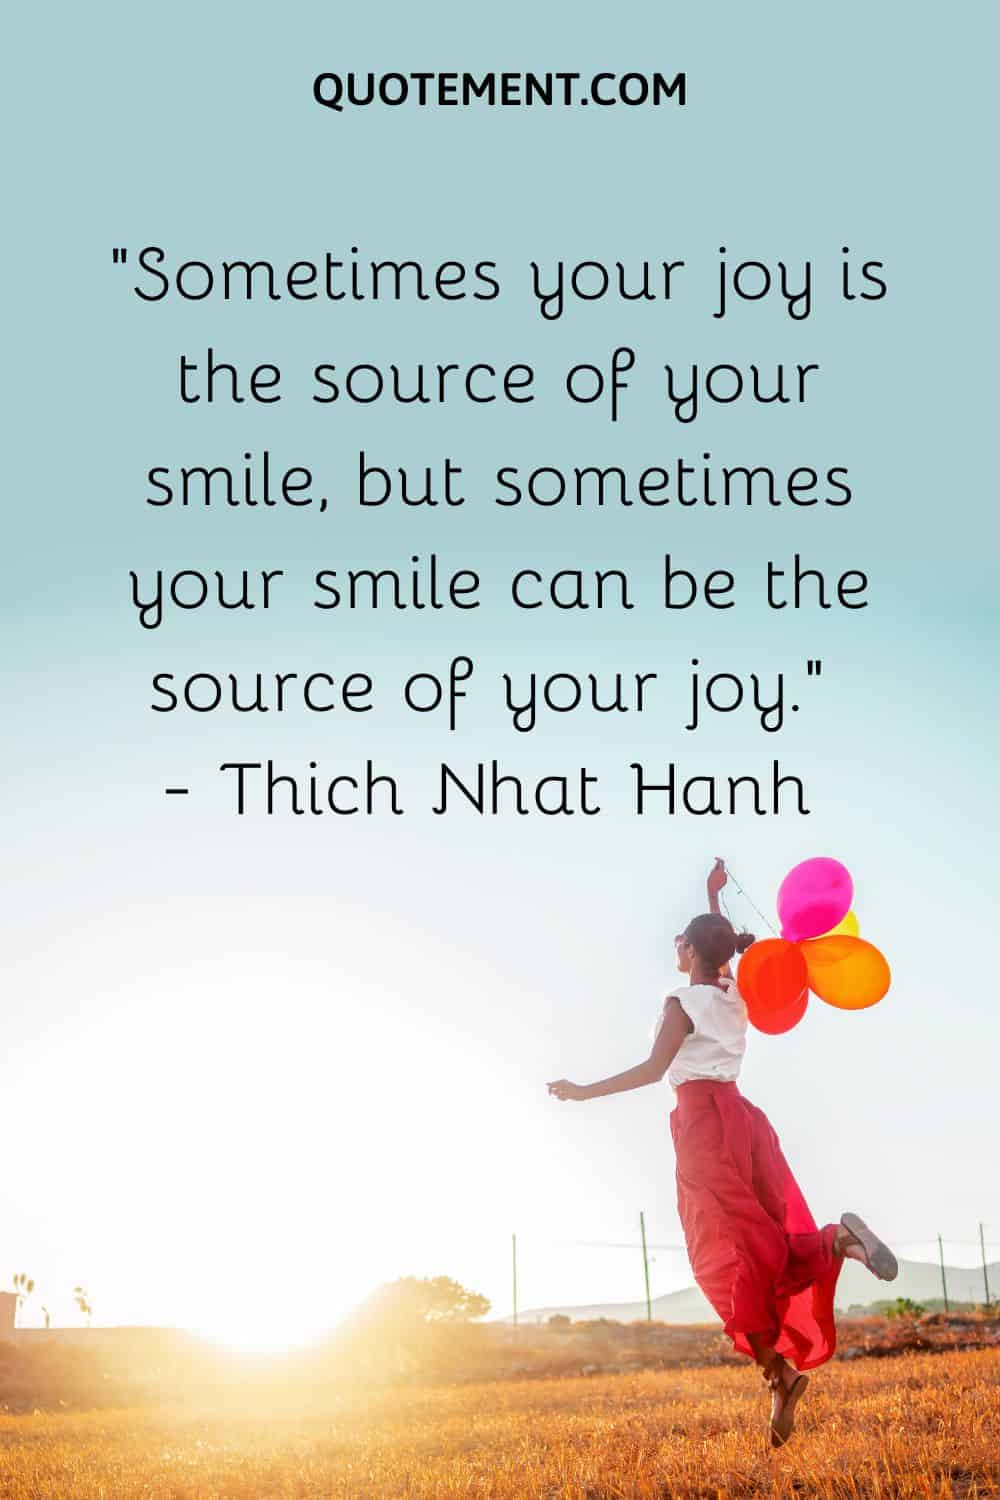 Sometimes your joy is the source of your smile